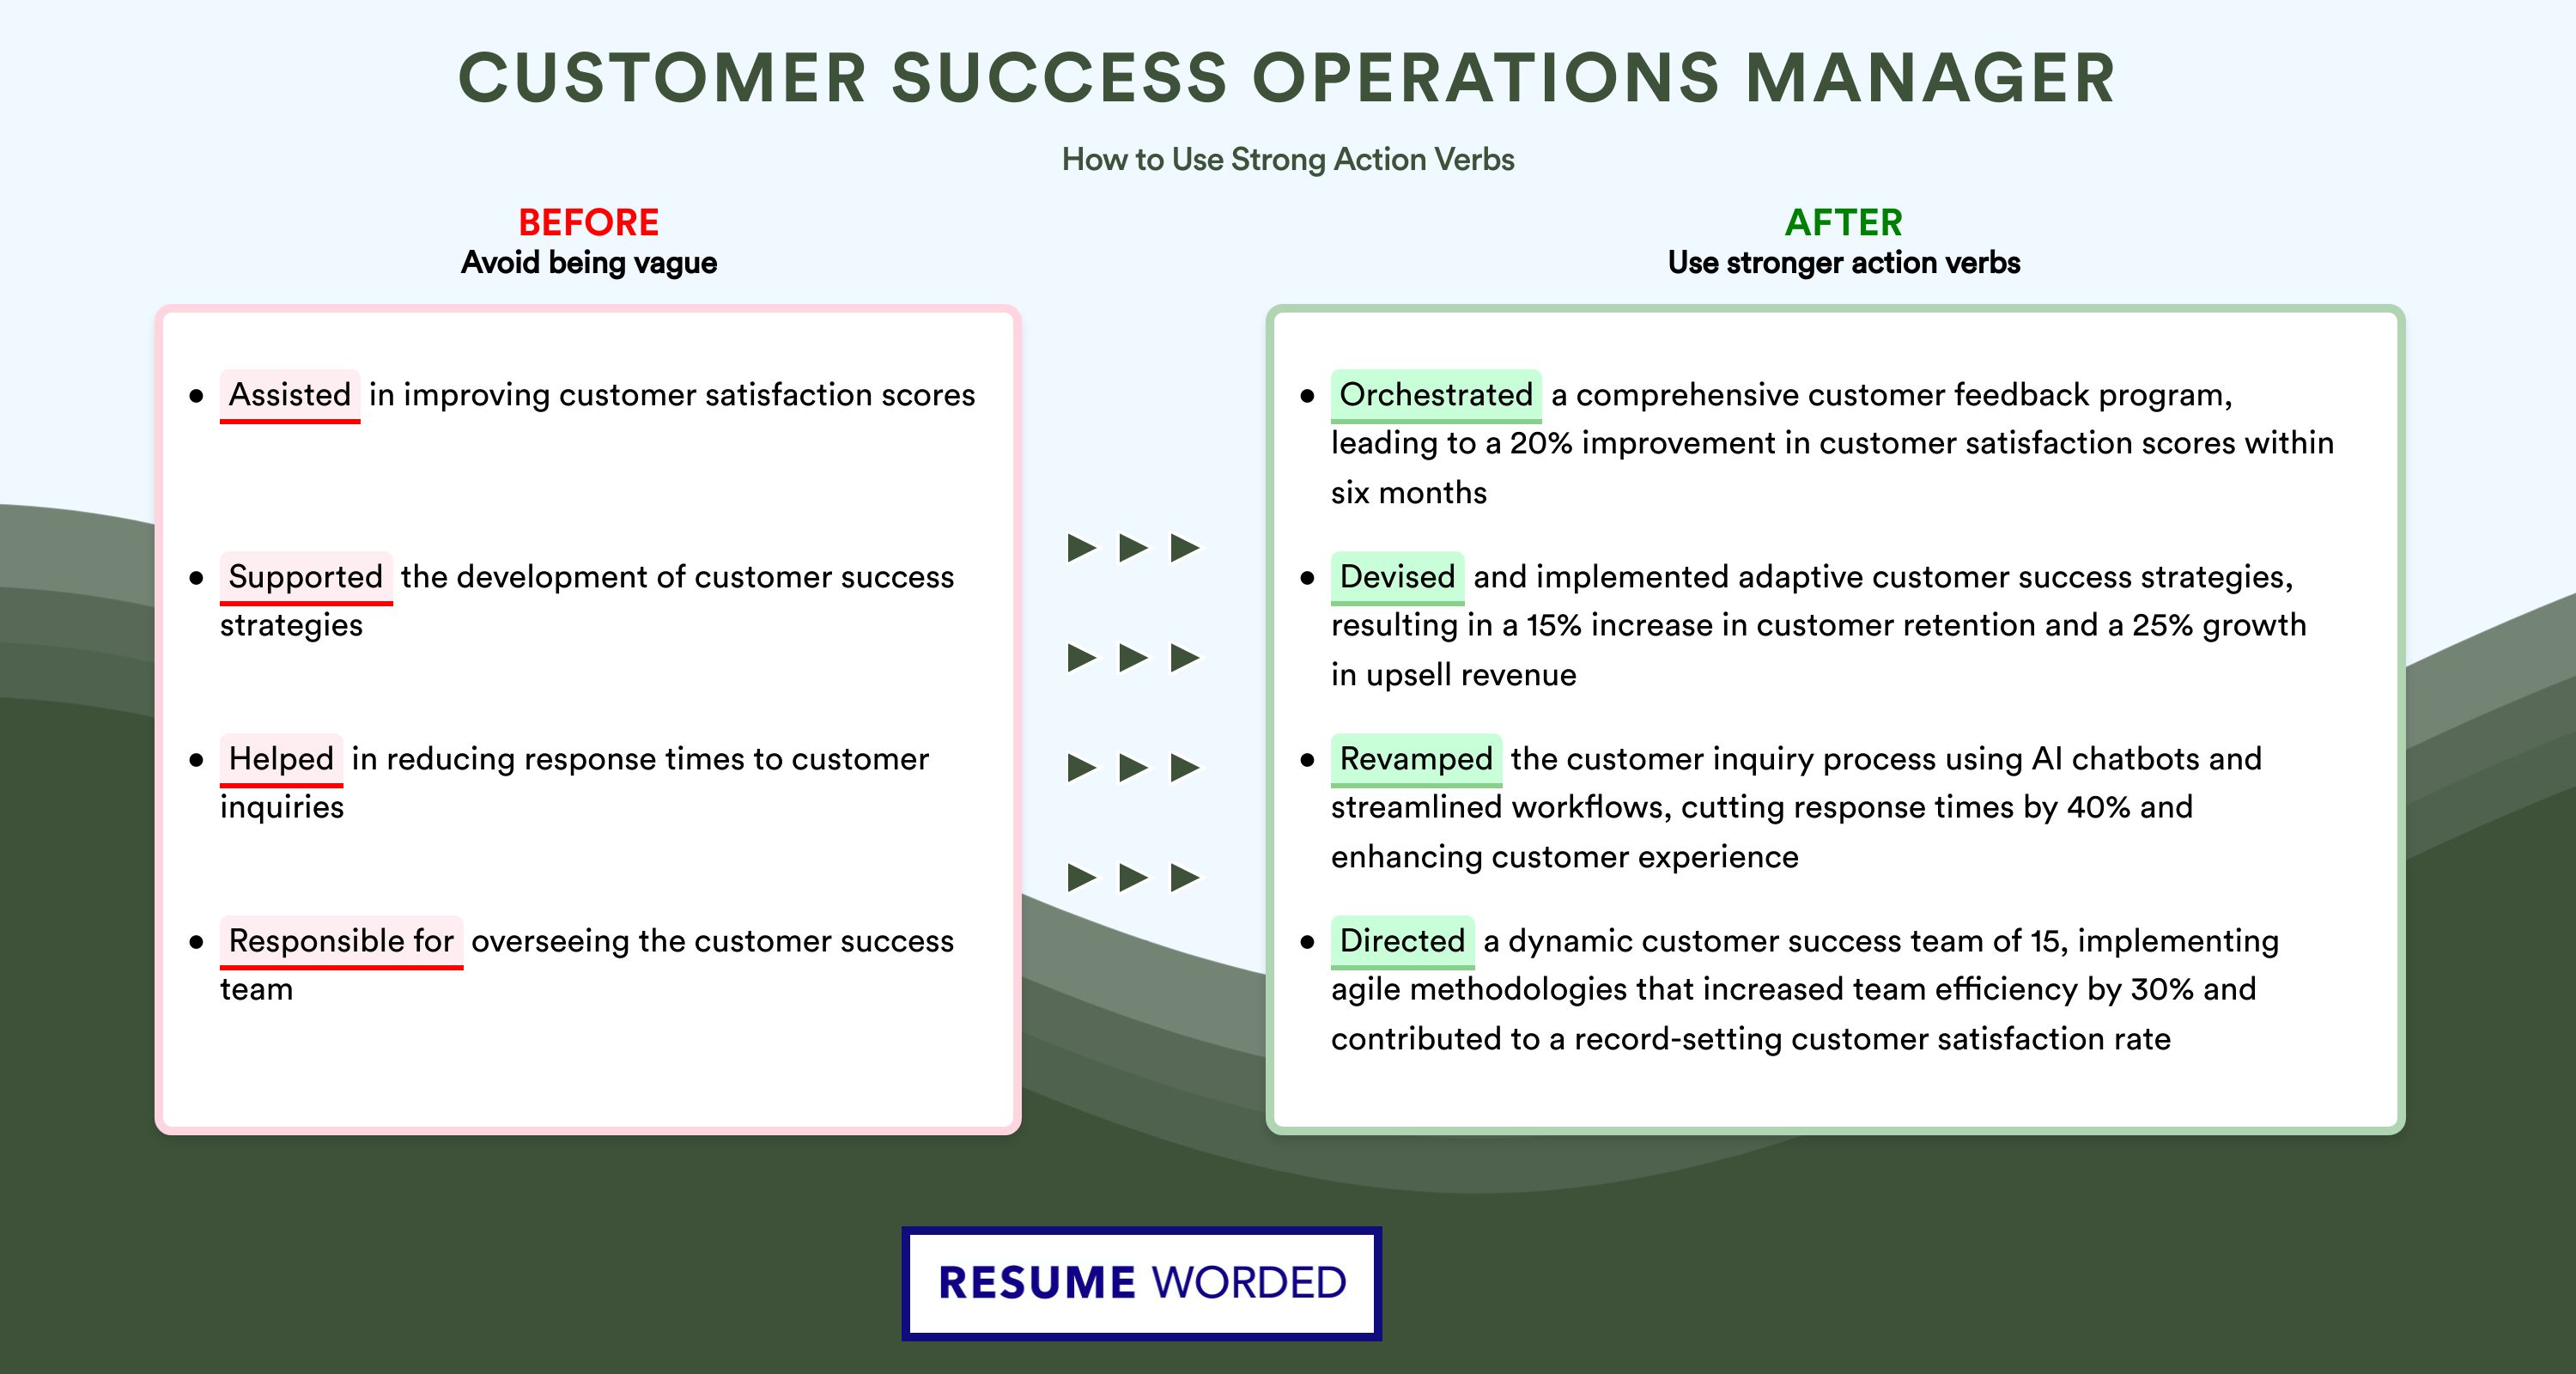 Action Verbs for Customer Success Operations Manager